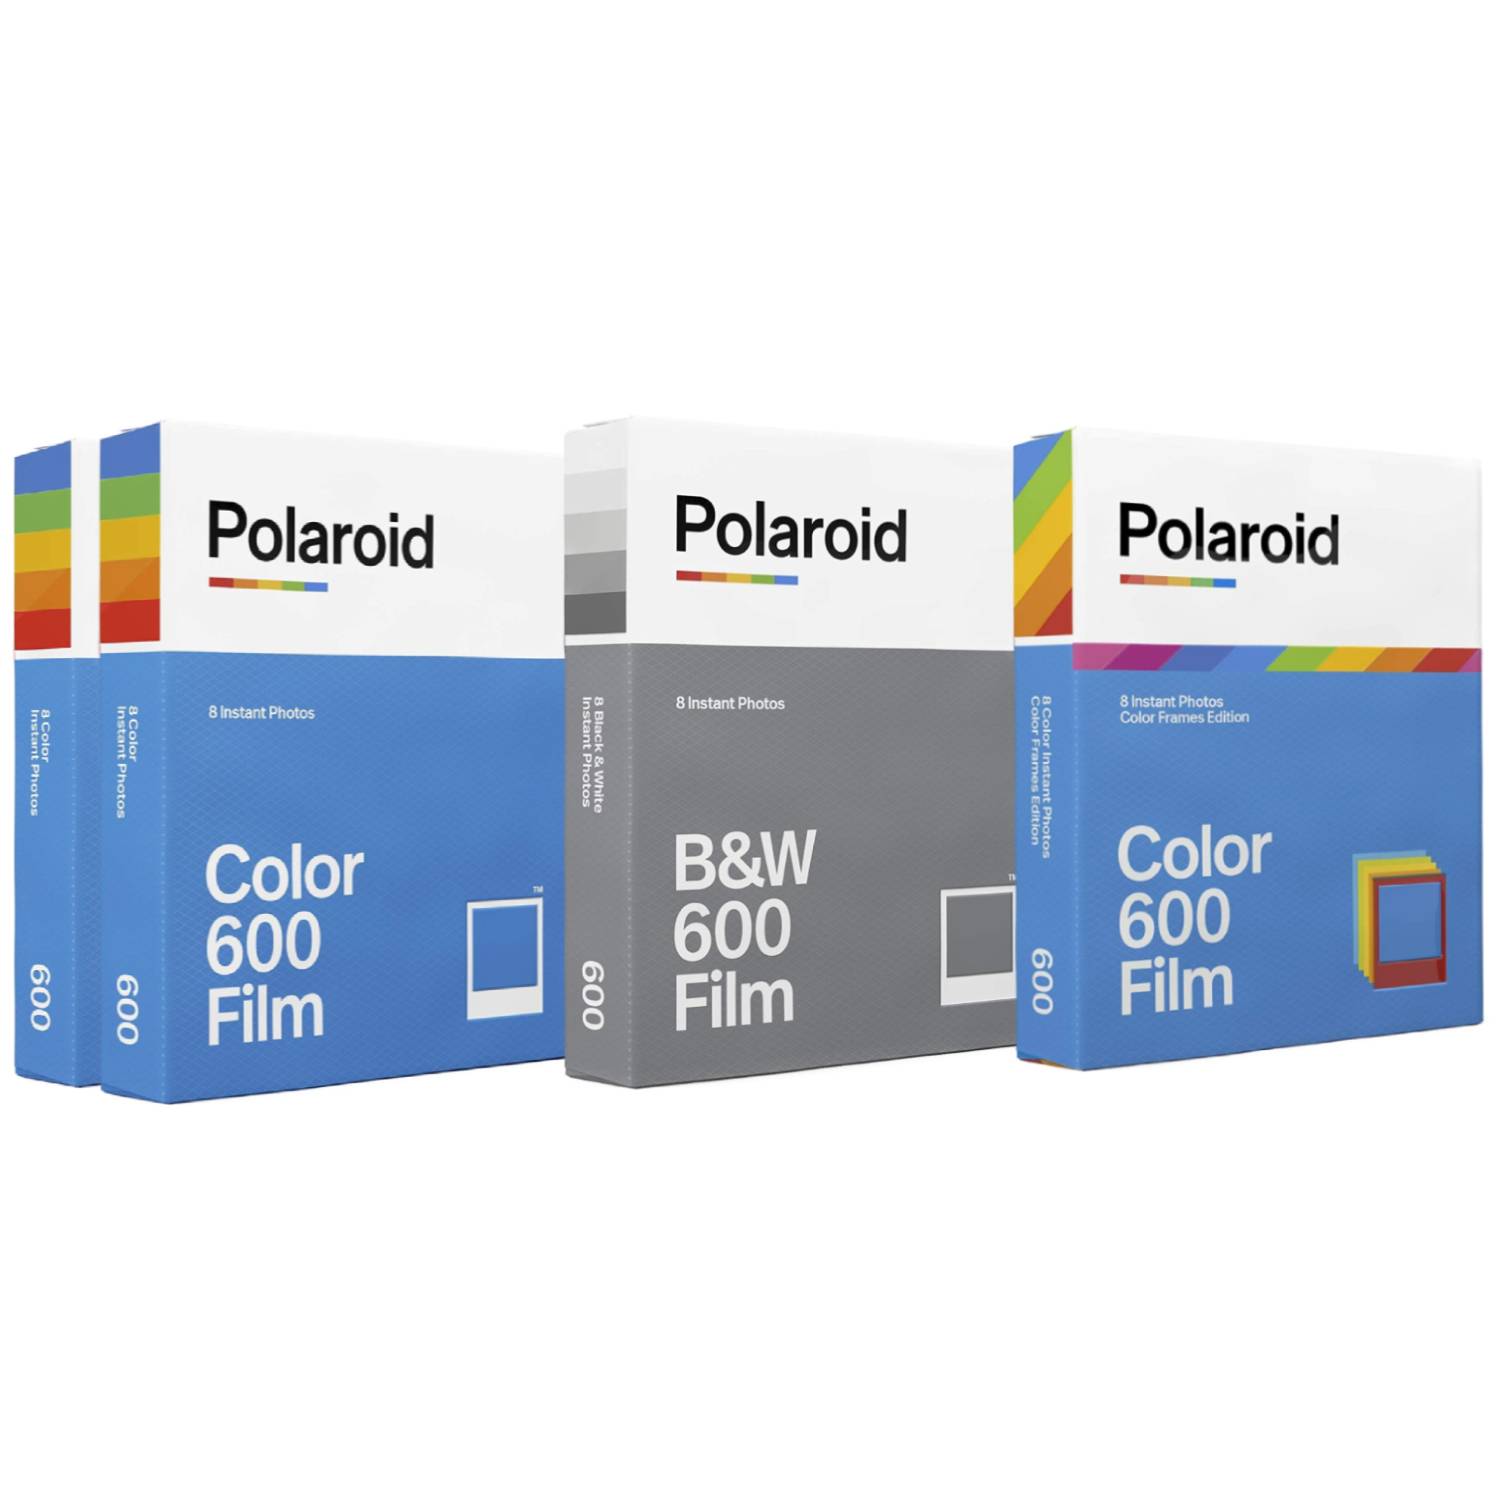 Polaroid 600 Instant Film Variety Pack - Color Film, Black and White Film, and Color Frames Film